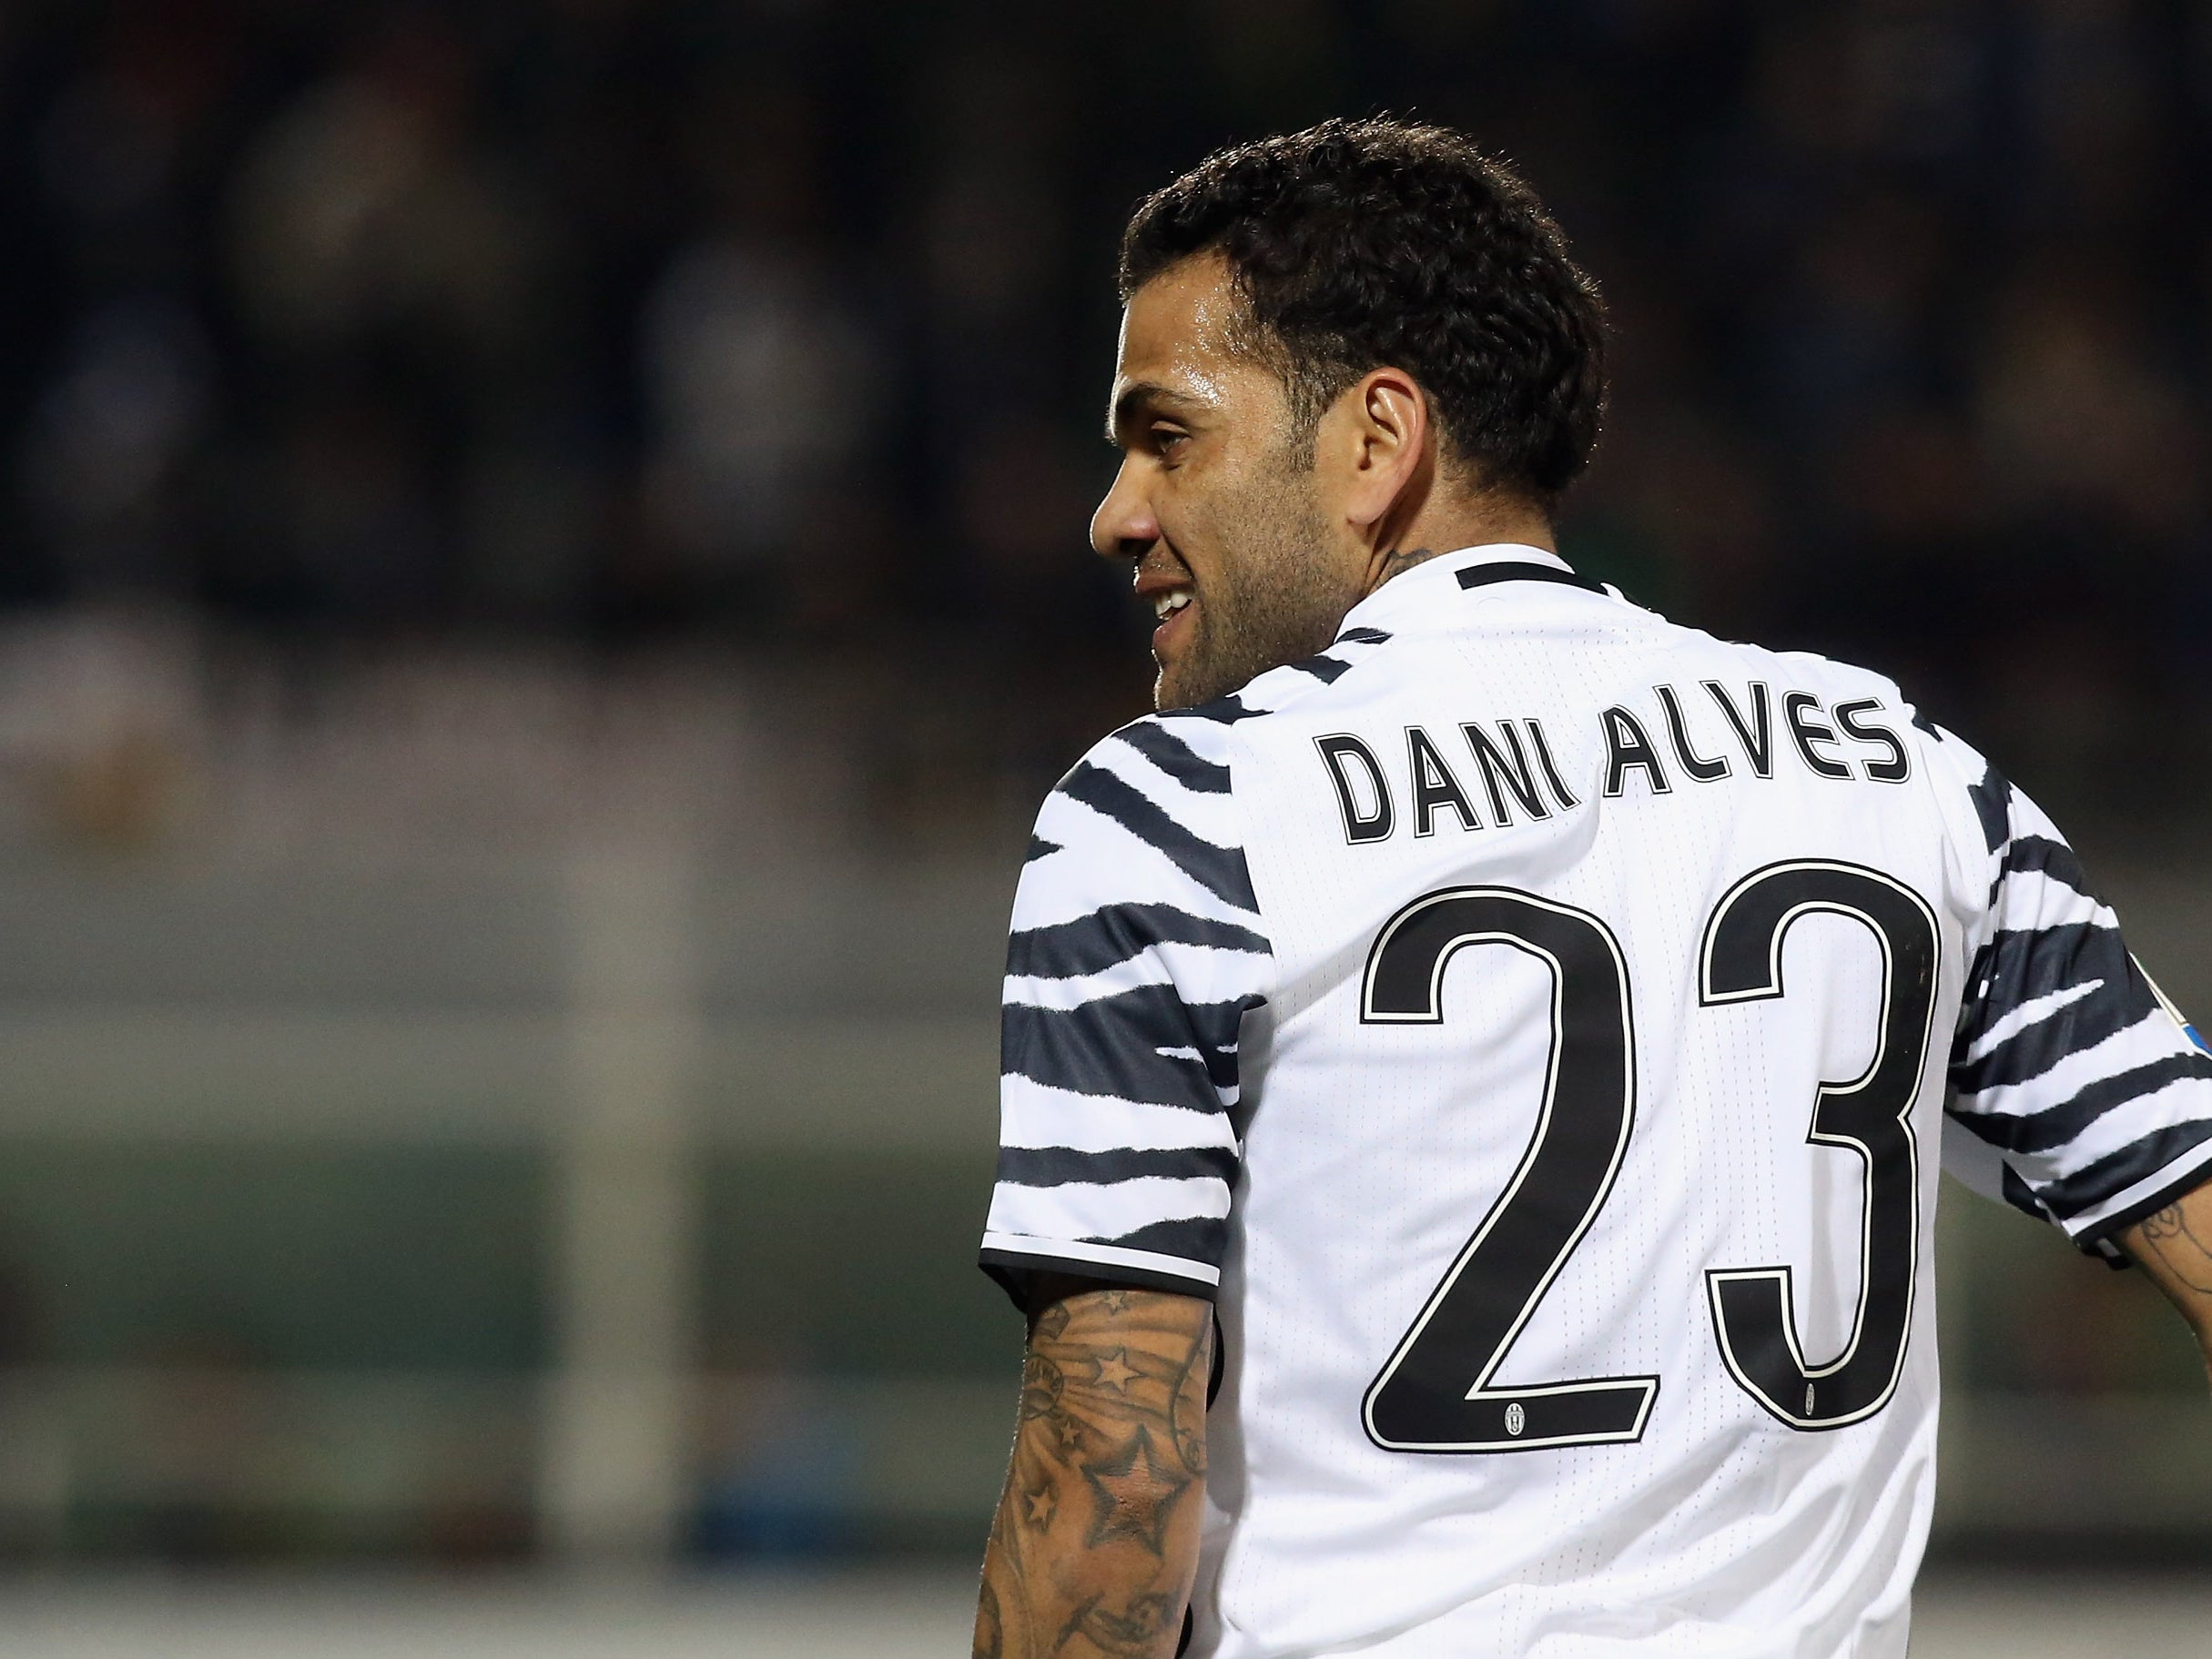 Dani Alves joined Juventus from Barcelona 12 months ago